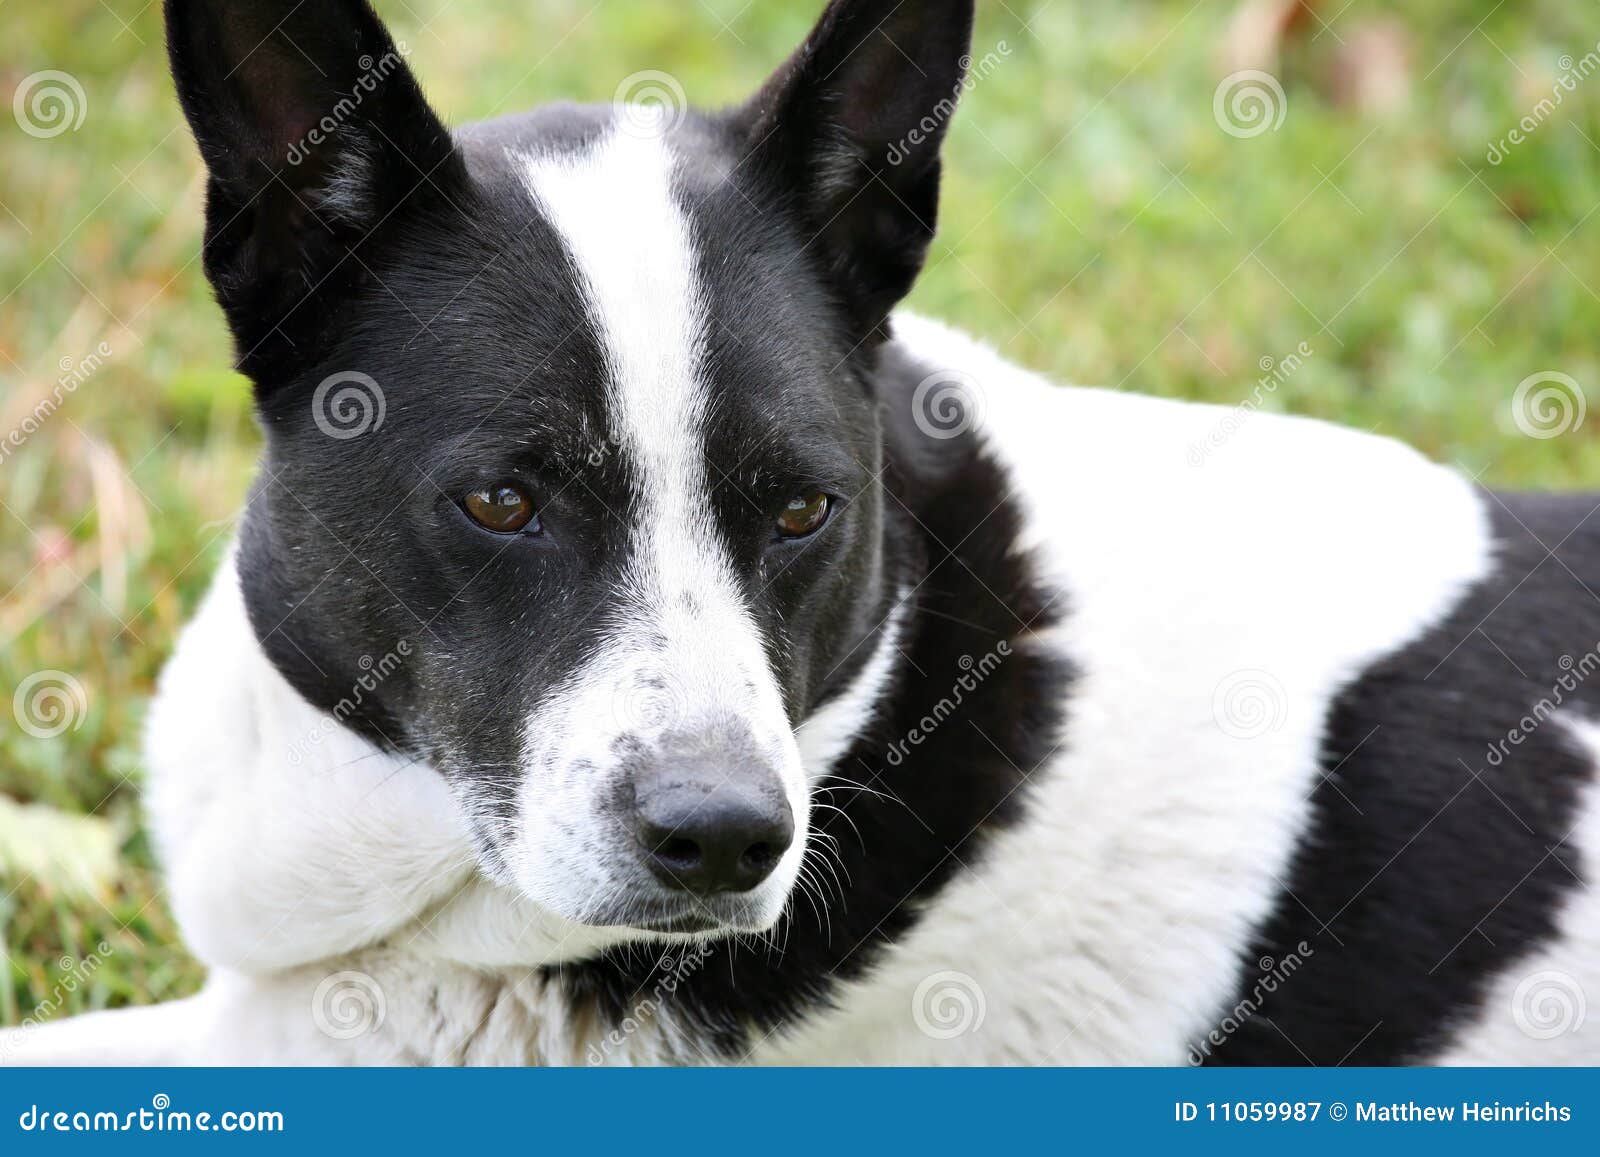 Border Collie Mix Dog Stock Image Image Of Snout Grass 11059987